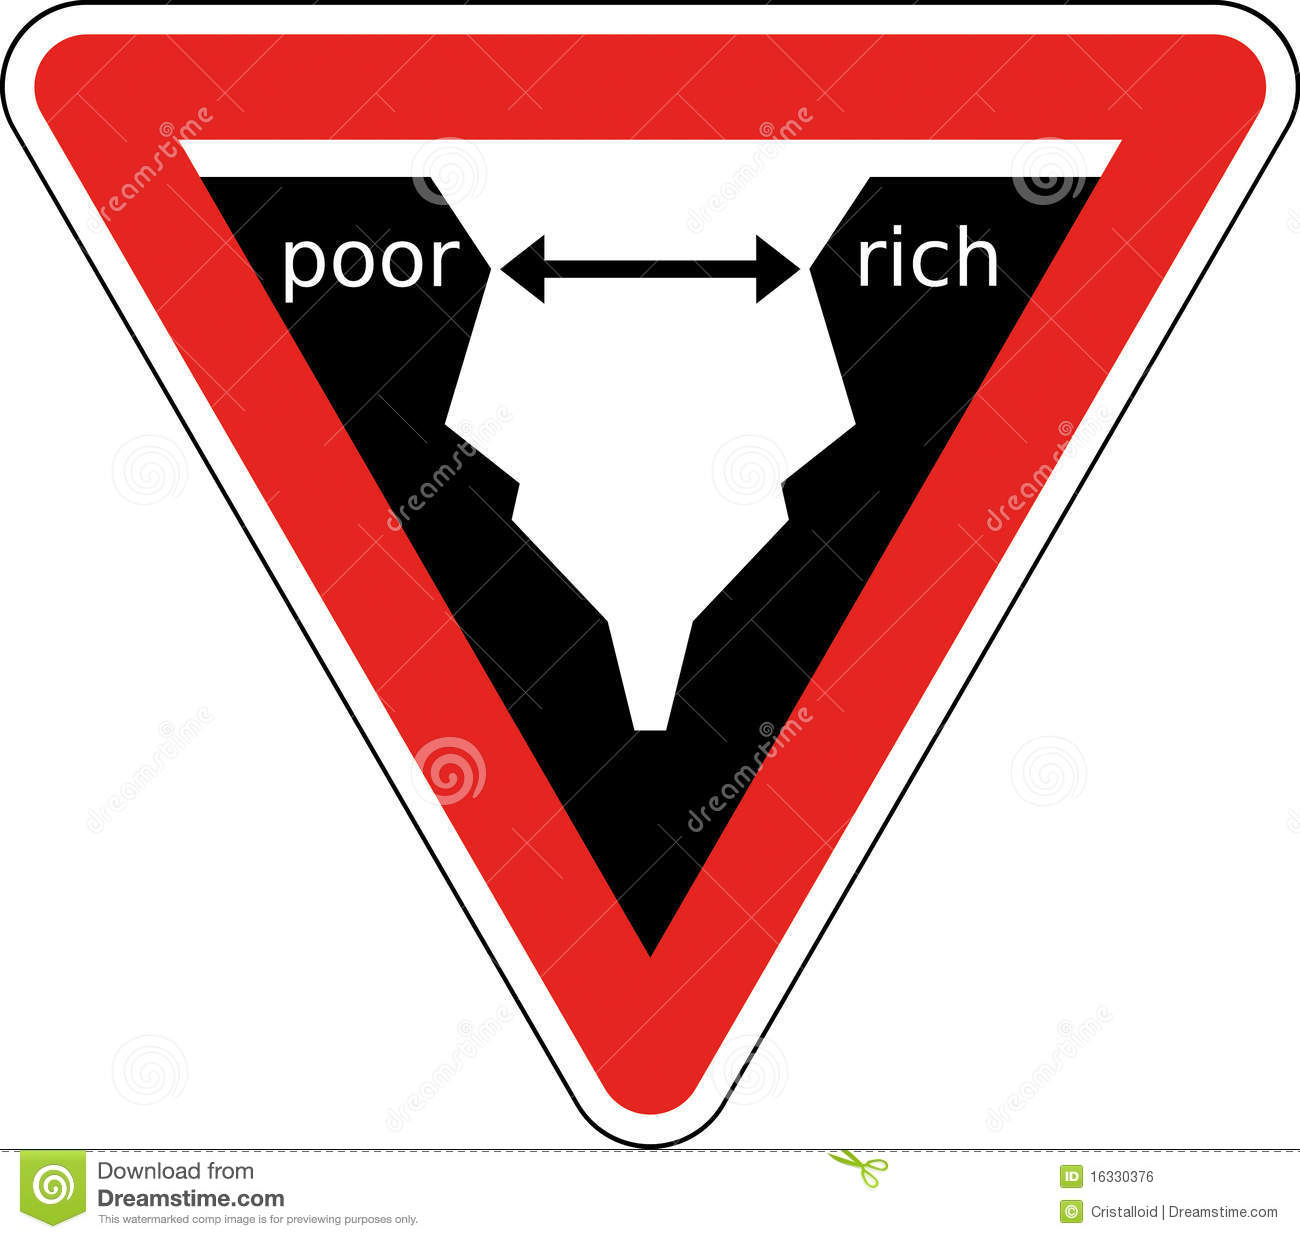 Rich And Poor Royalty Free Stock Image   Image  16330376